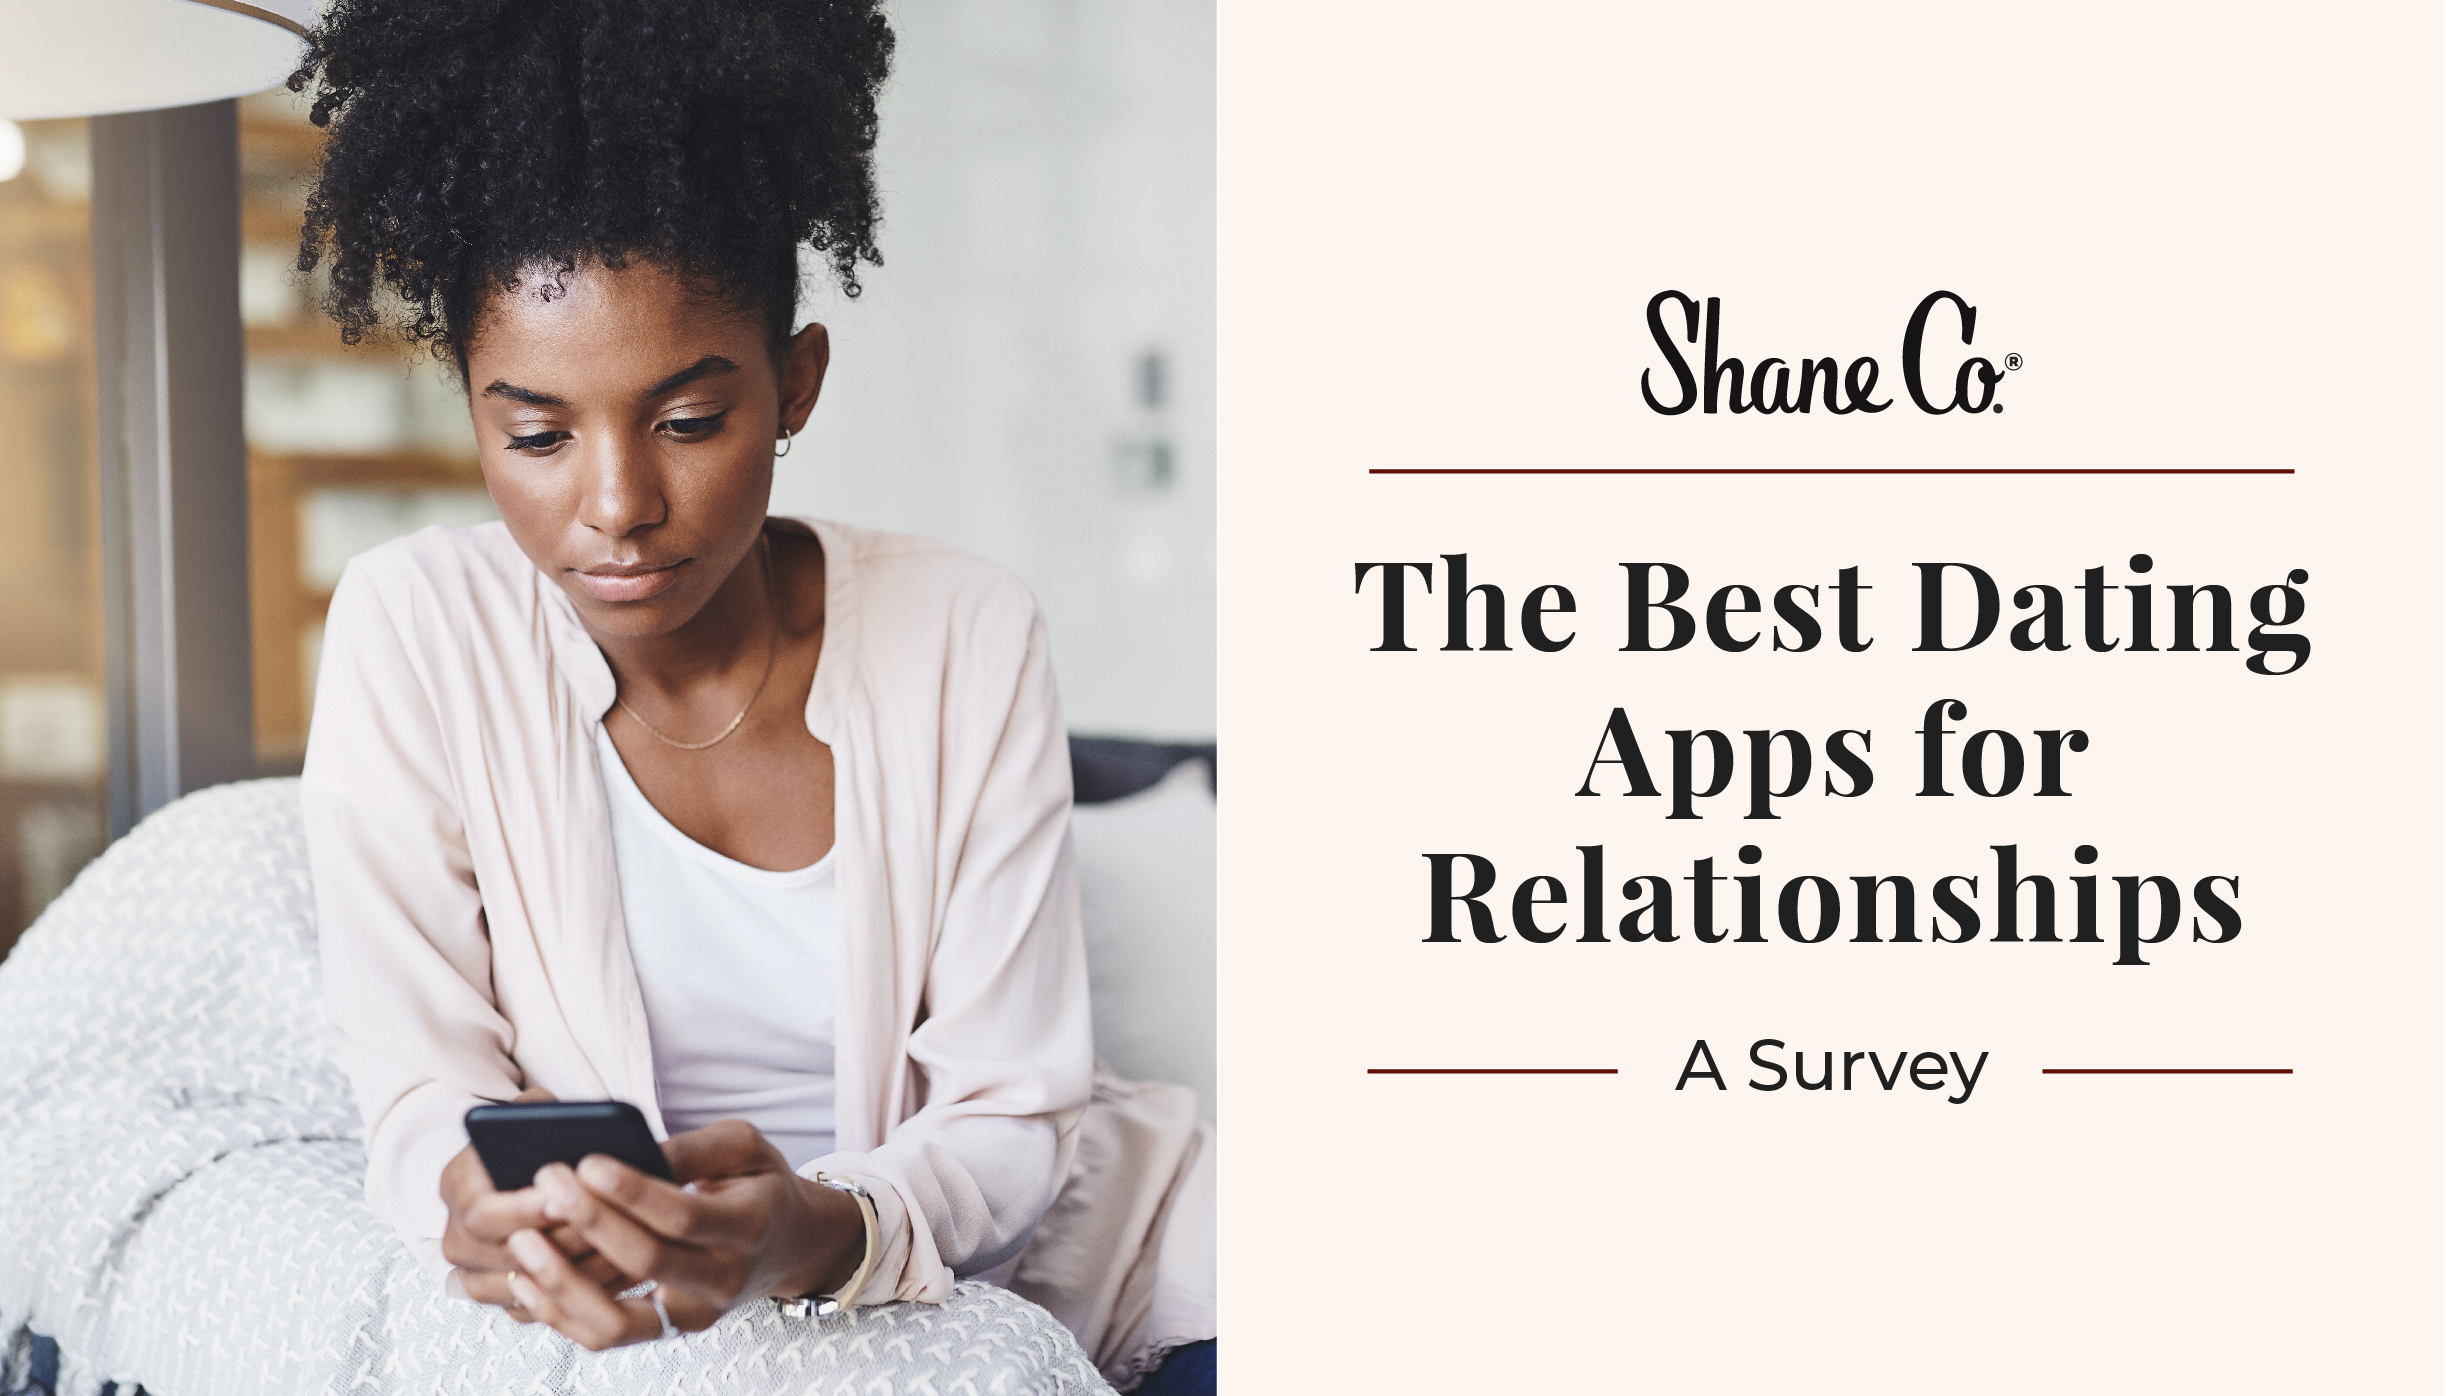 The best dating apps for relationships.